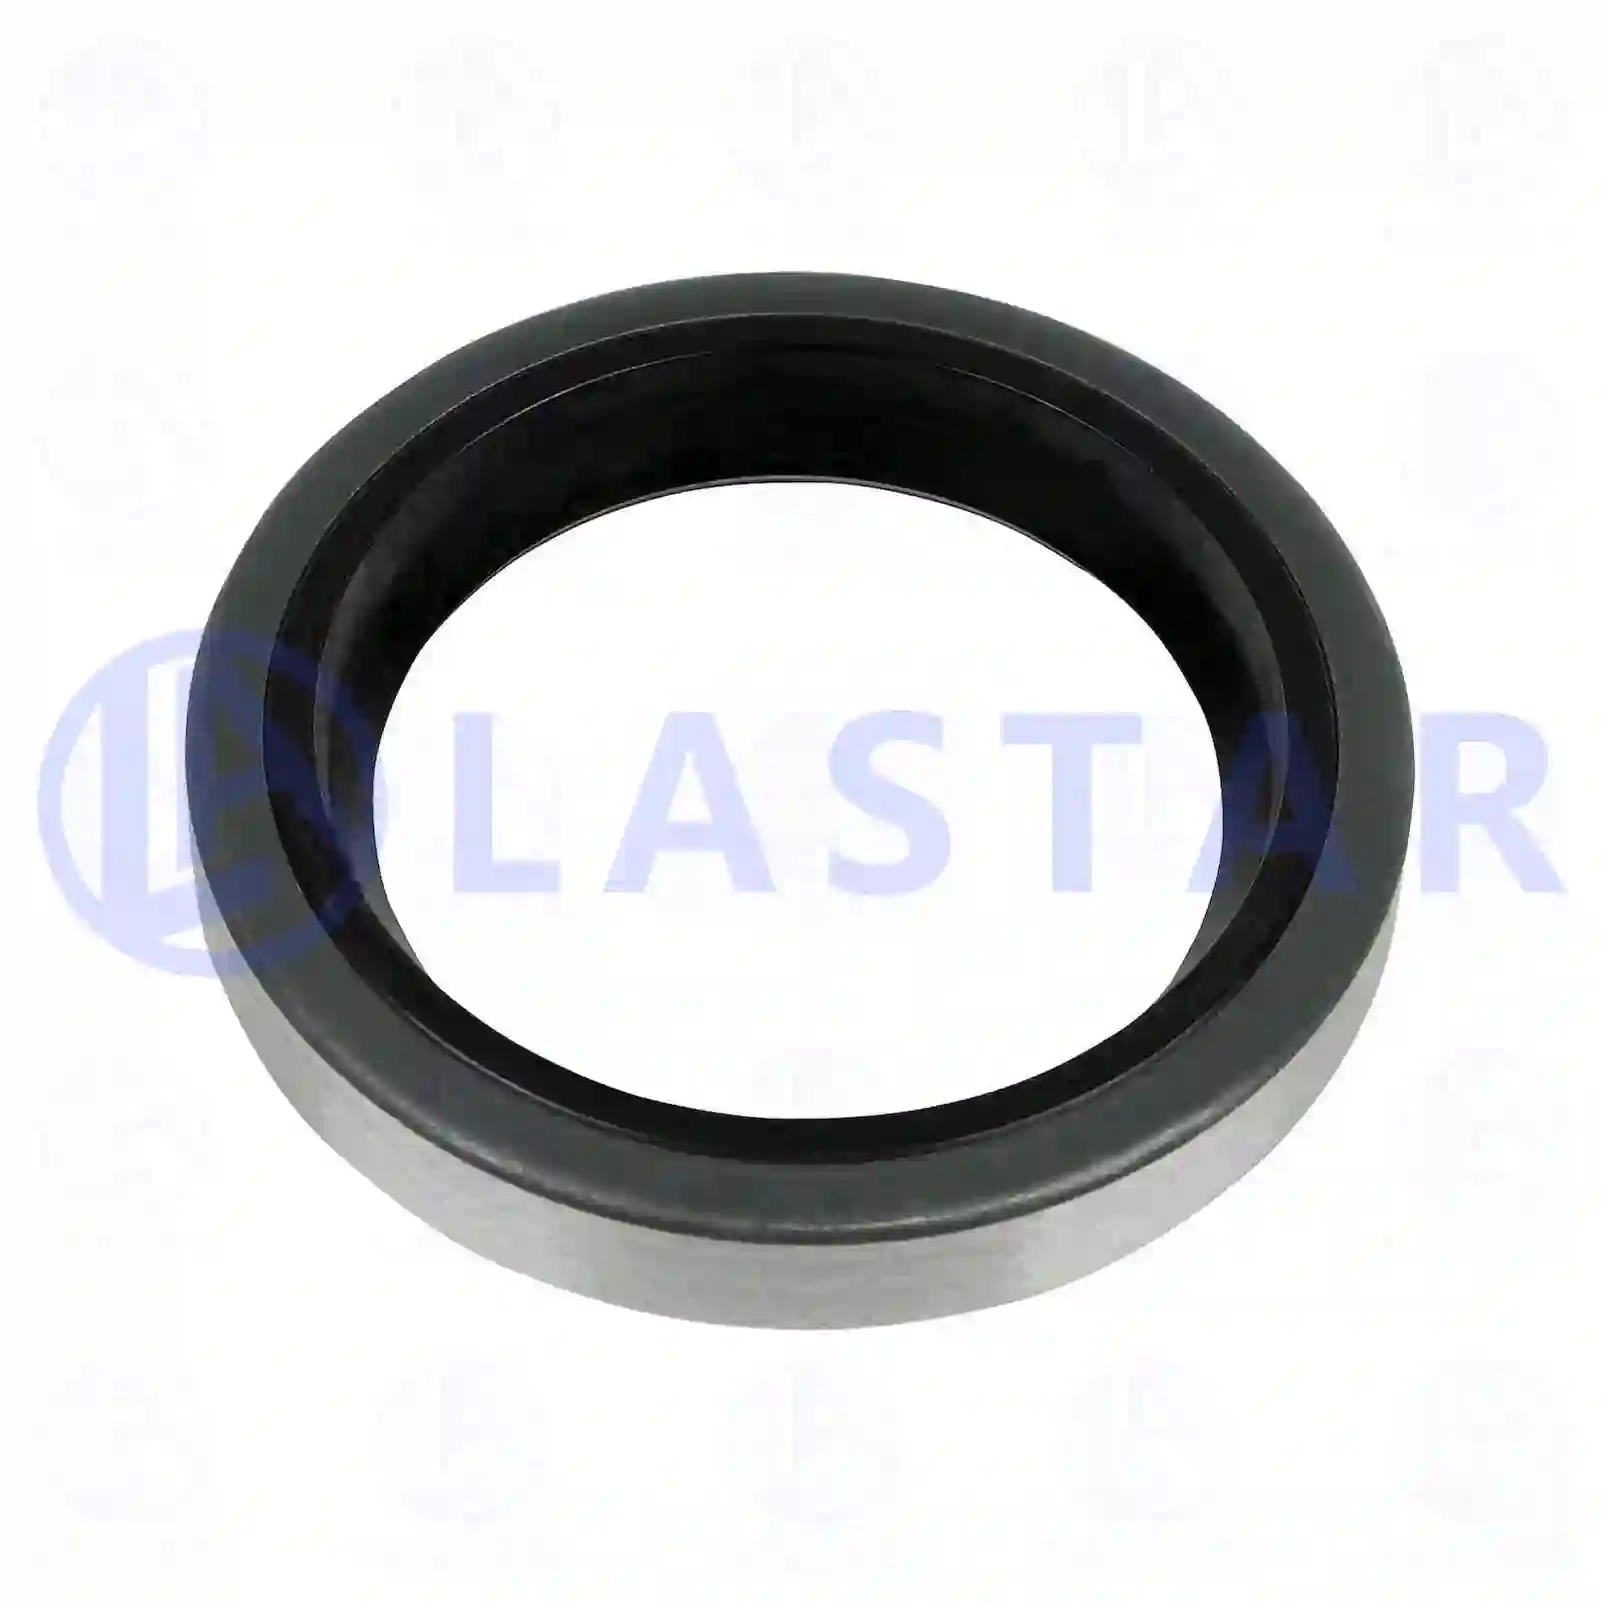 Oil seal, 77731983, 0586697, 586697, 04117801, 40001110, 79007266, 6109963, 01274257, 02980071, 09933015, 1274257, 2980071, 42487485, 9933015, 06562790042, 81965020248, A0851853300, 0009972147, 0079972147, 0099974746, 0003207340, 0851853300, 5000250015, 5000802710, 5000839806, 7701014157, 880221400, 99112220821, 6857279, 6876127 ||  77731983 Lastar Spare Part | Truck Spare Parts, Auotomotive Spare Parts Oil seal, 77731983, 0586697, 586697, 04117801, 40001110, 79007266, 6109963, 01274257, 02980071, 09933015, 1274257, 2980071, 42487485, 9933015, 06562790042, 81965020248, A0851853300, 0009972147, 0079972147, 0099974746, 0003207340, 0851853300, 5000250015, 5000802710, 5000839806, 7701014157, 880221400, 99112220821, 6857279, 6876127 ||  77731983 Lastar Spare Part | Truck Spare Parts, Auotomotive Spare Parts